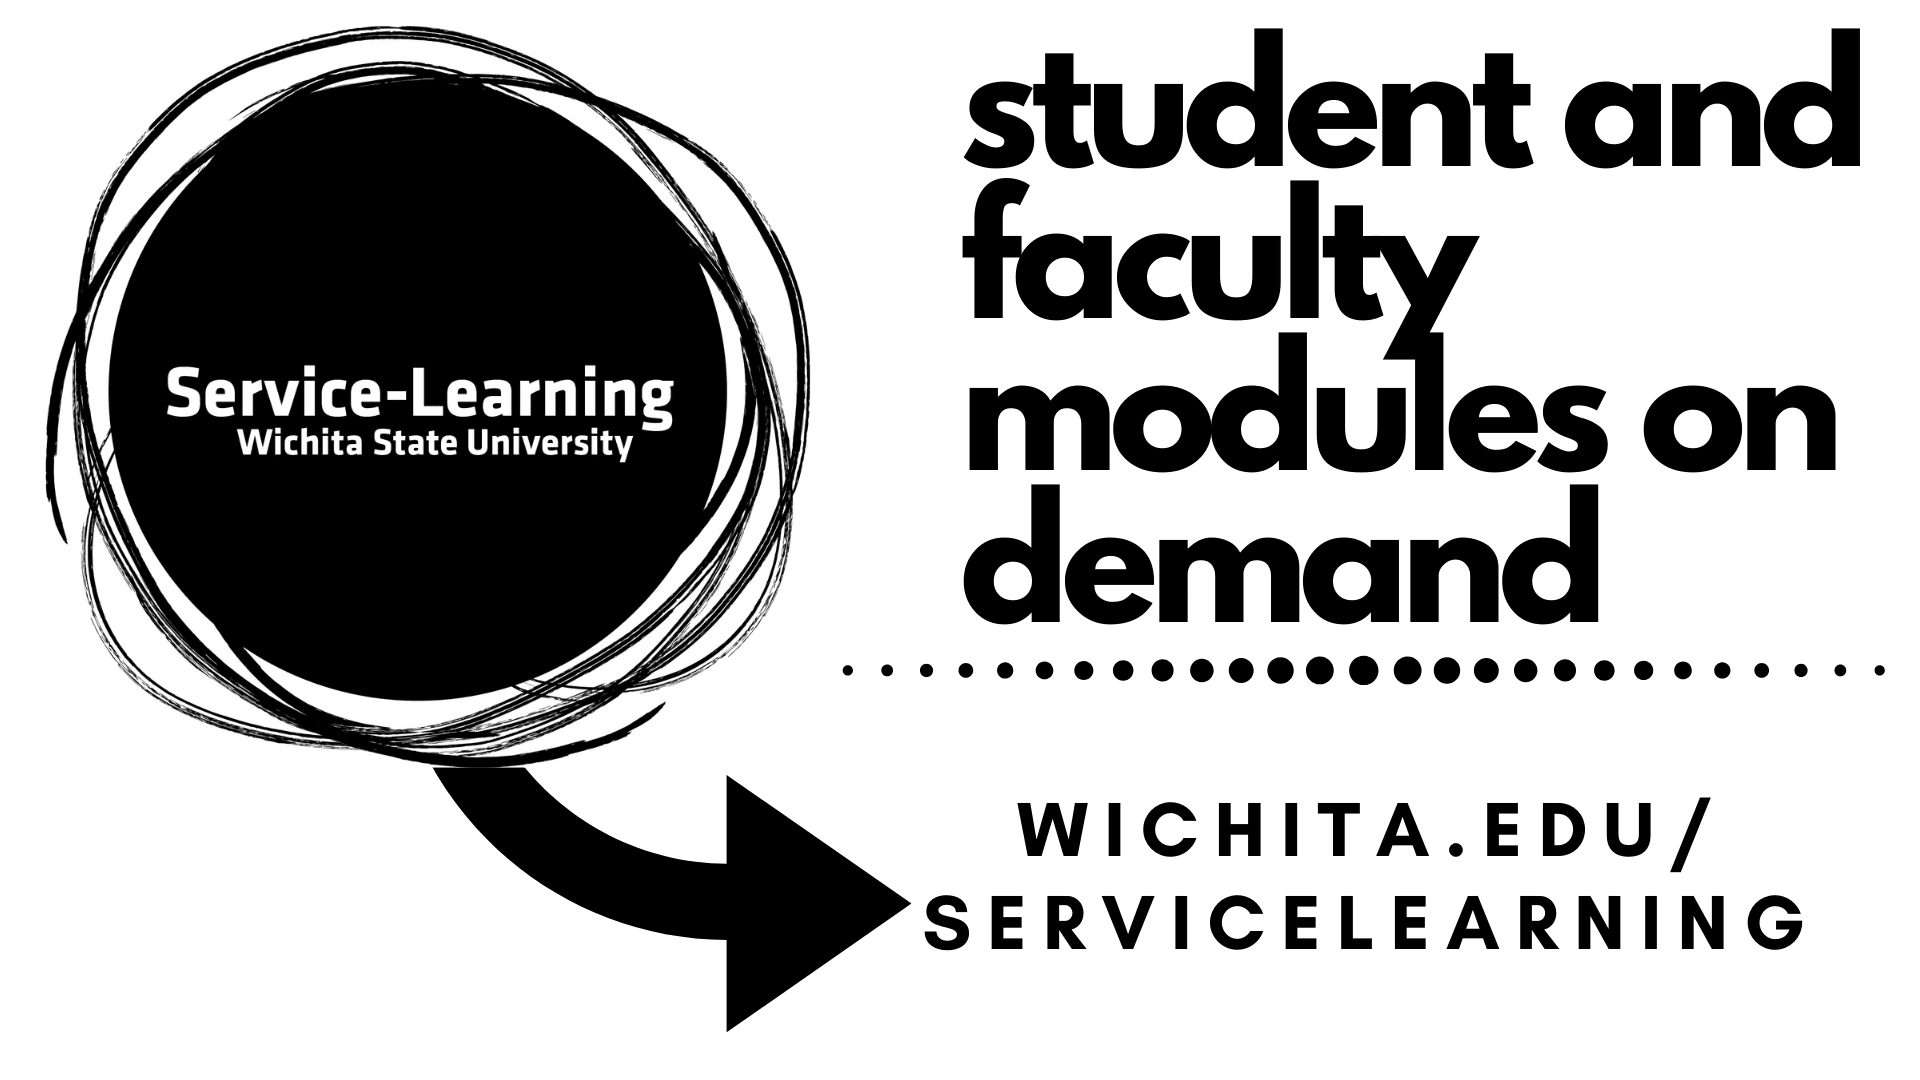 Image with black and white circle and arrow. Inside circle text- Service-Learning Wichita State University. Arrow below circle points to text- Student and Faculty Modules On Demand. Website- wichita.edu/servicelearning